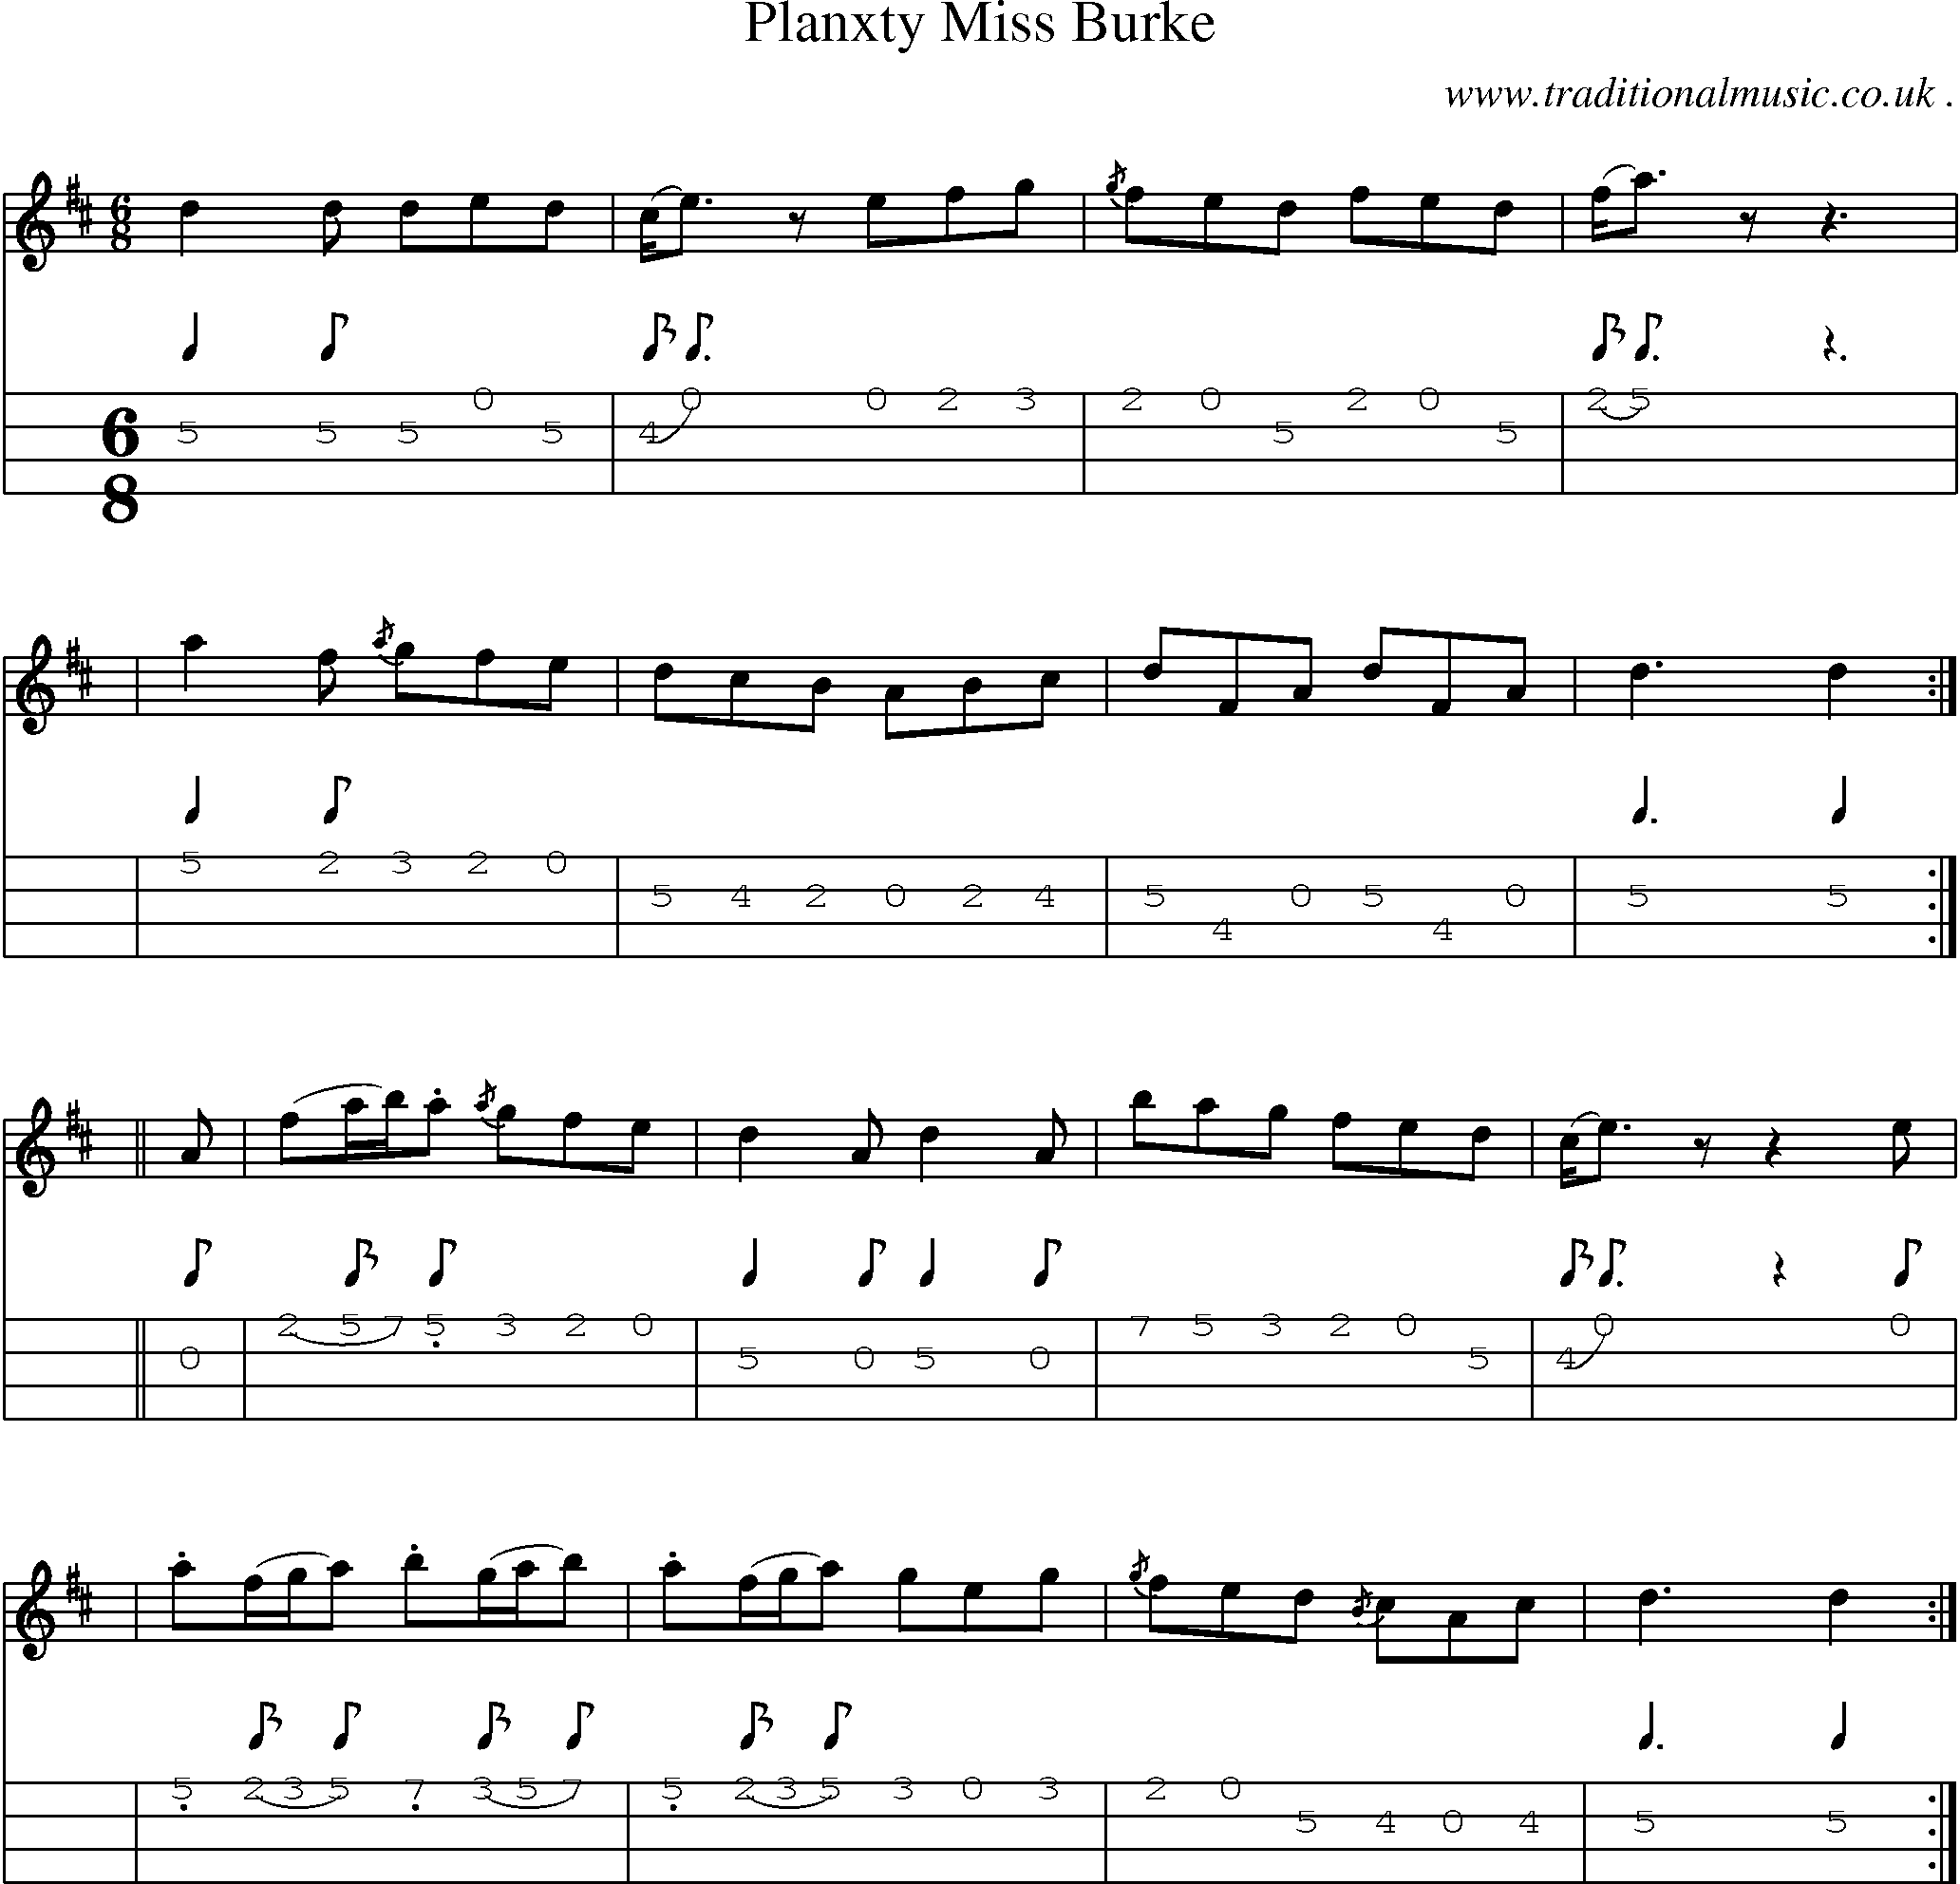 Sheet-music  score, Chords and Mandolin Tabs for Planxty Miss Burke